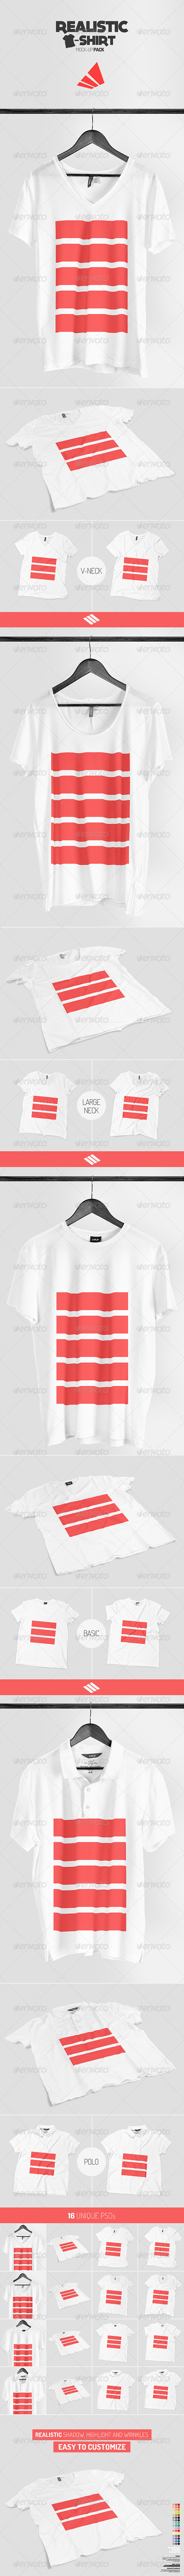 Realistic T-shirt Mock-up Pack